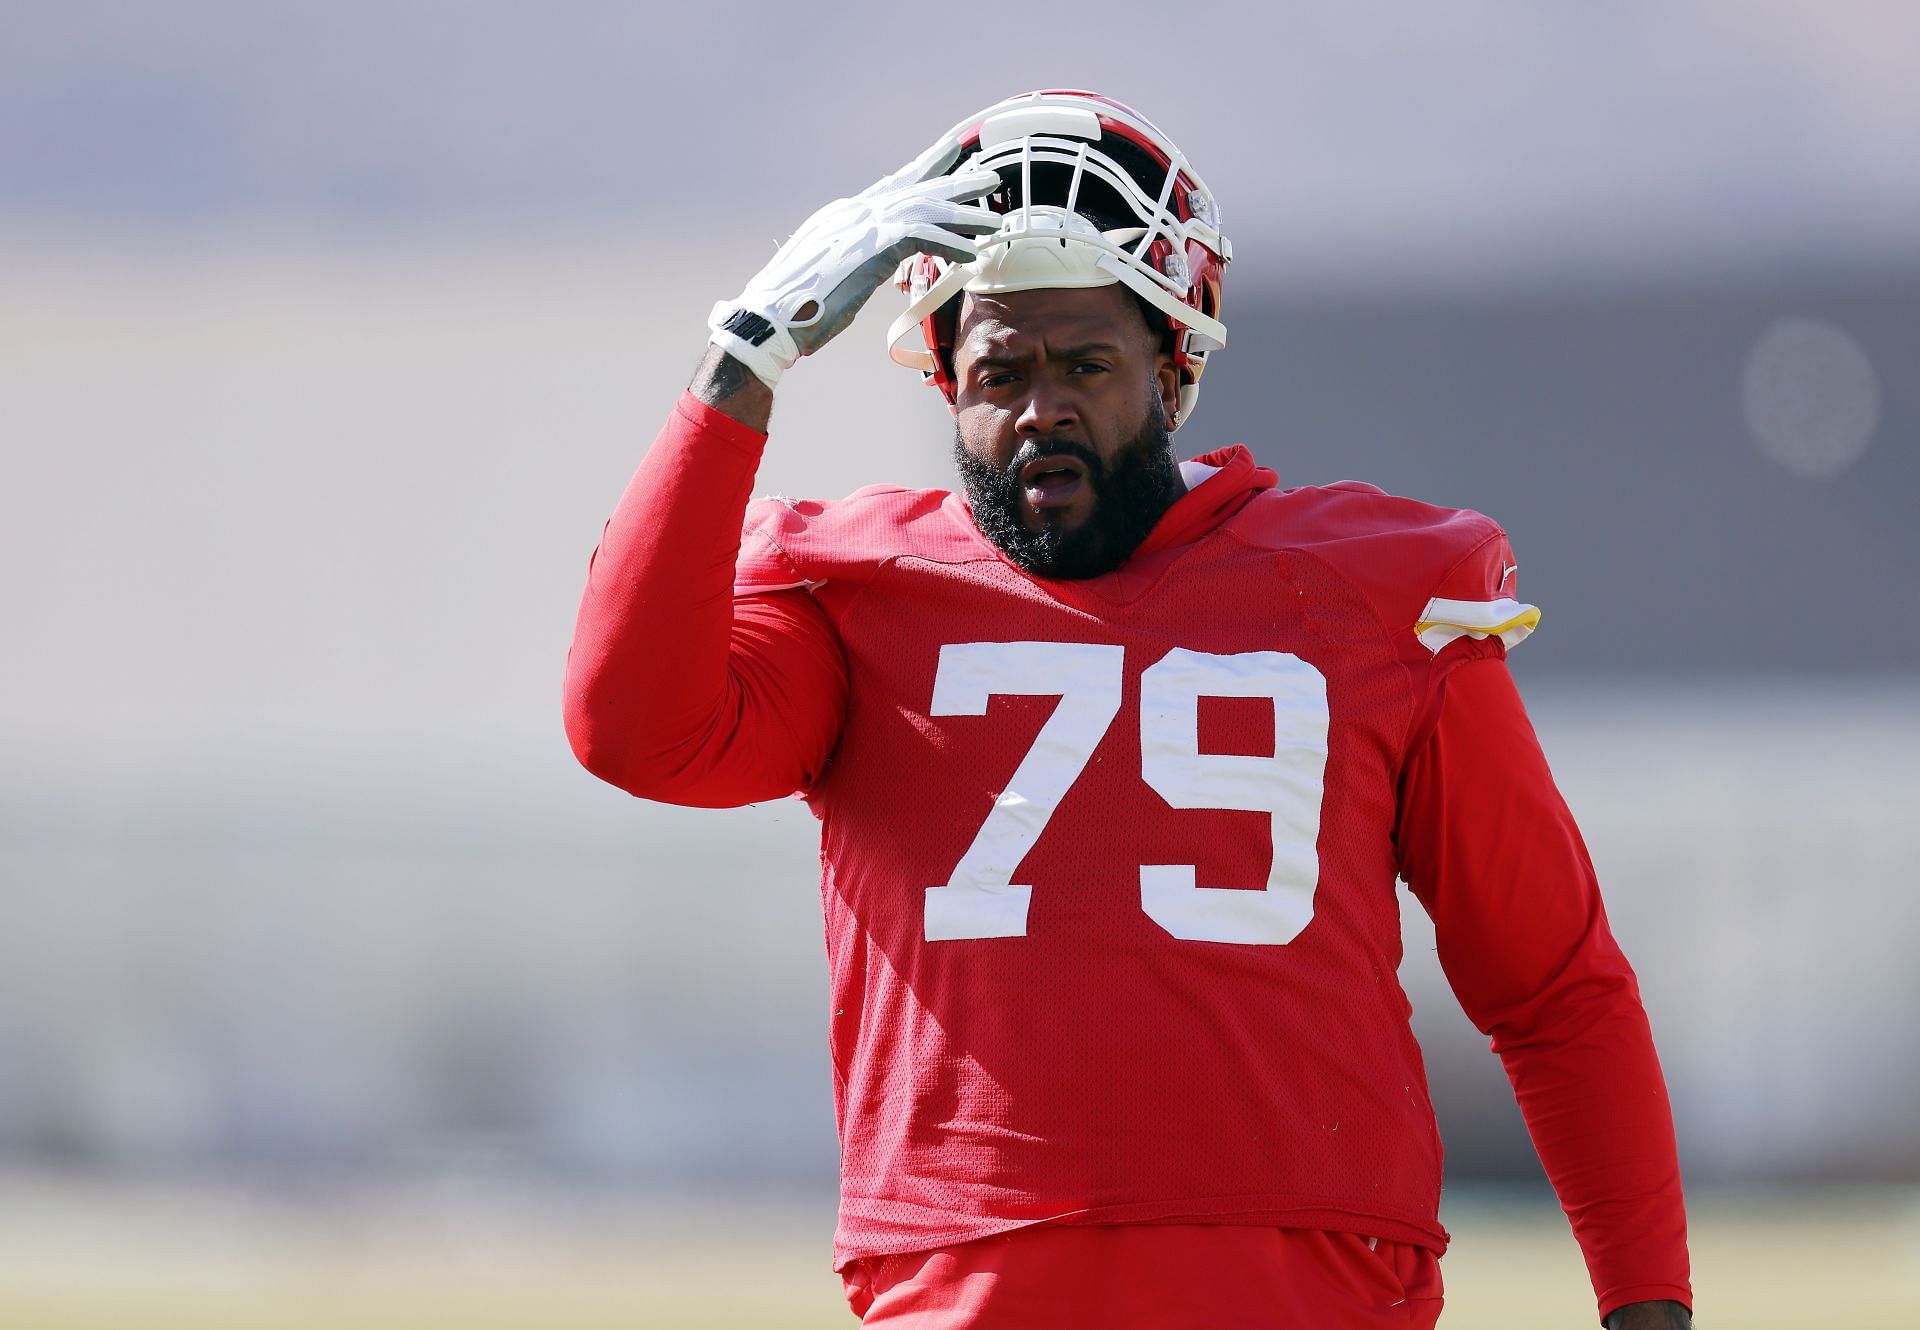 Offensive tackle Donovan Smith #79 warms up during Kansas City Chiefs practice ahead of Super Bowl LVIII  (Image credit: Getty)